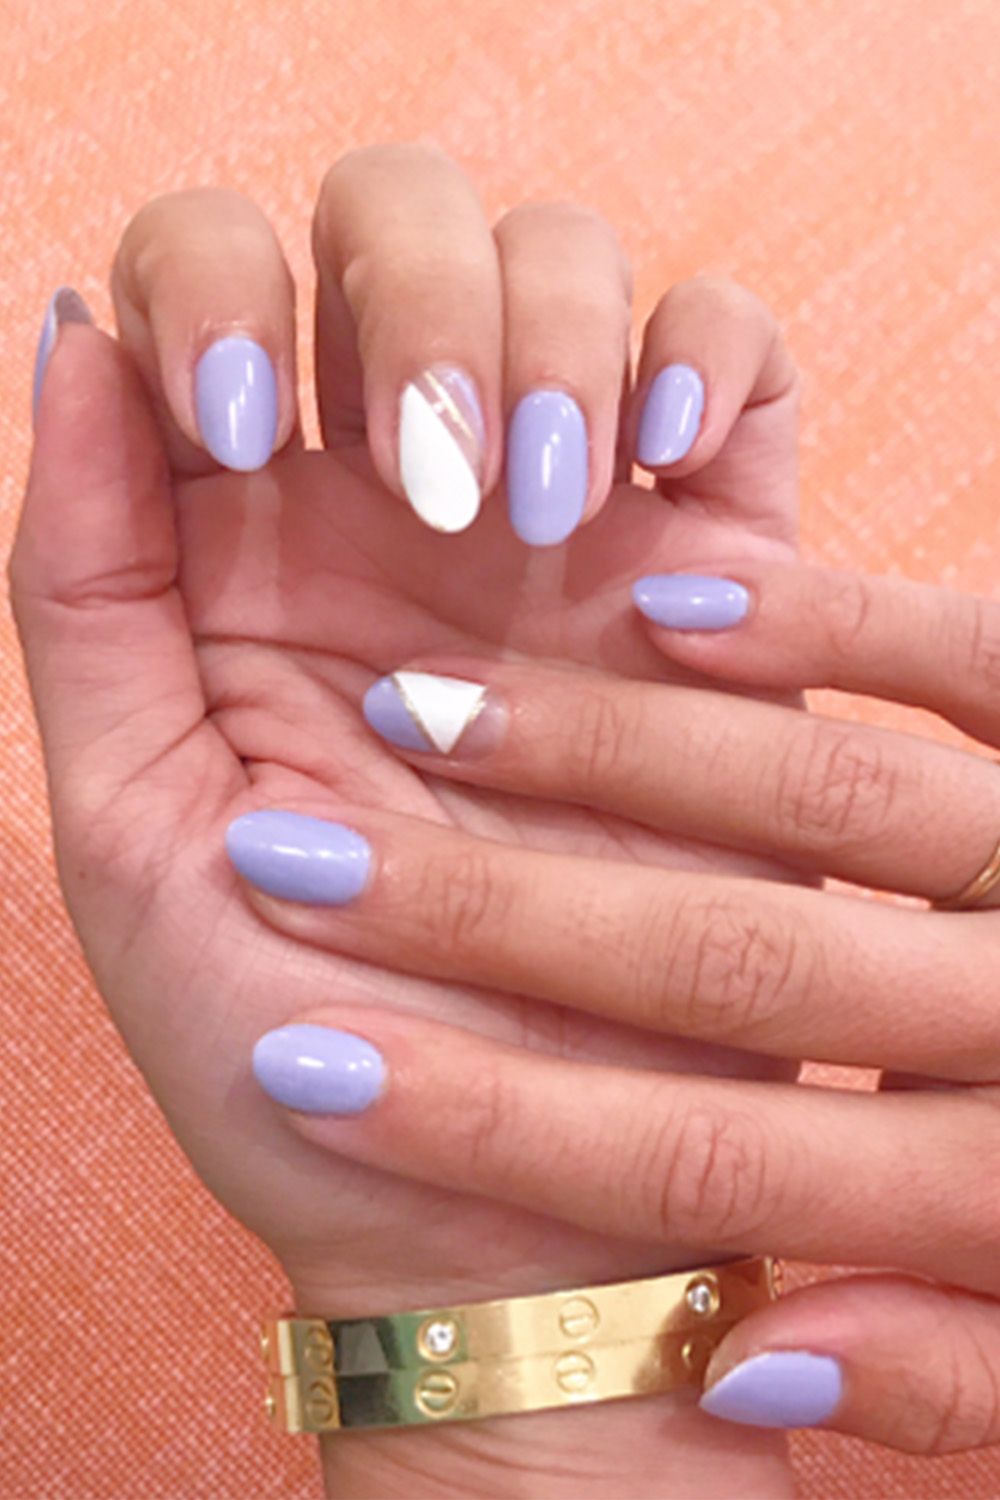 1519407326 Almond Nails Gallery Lavender 